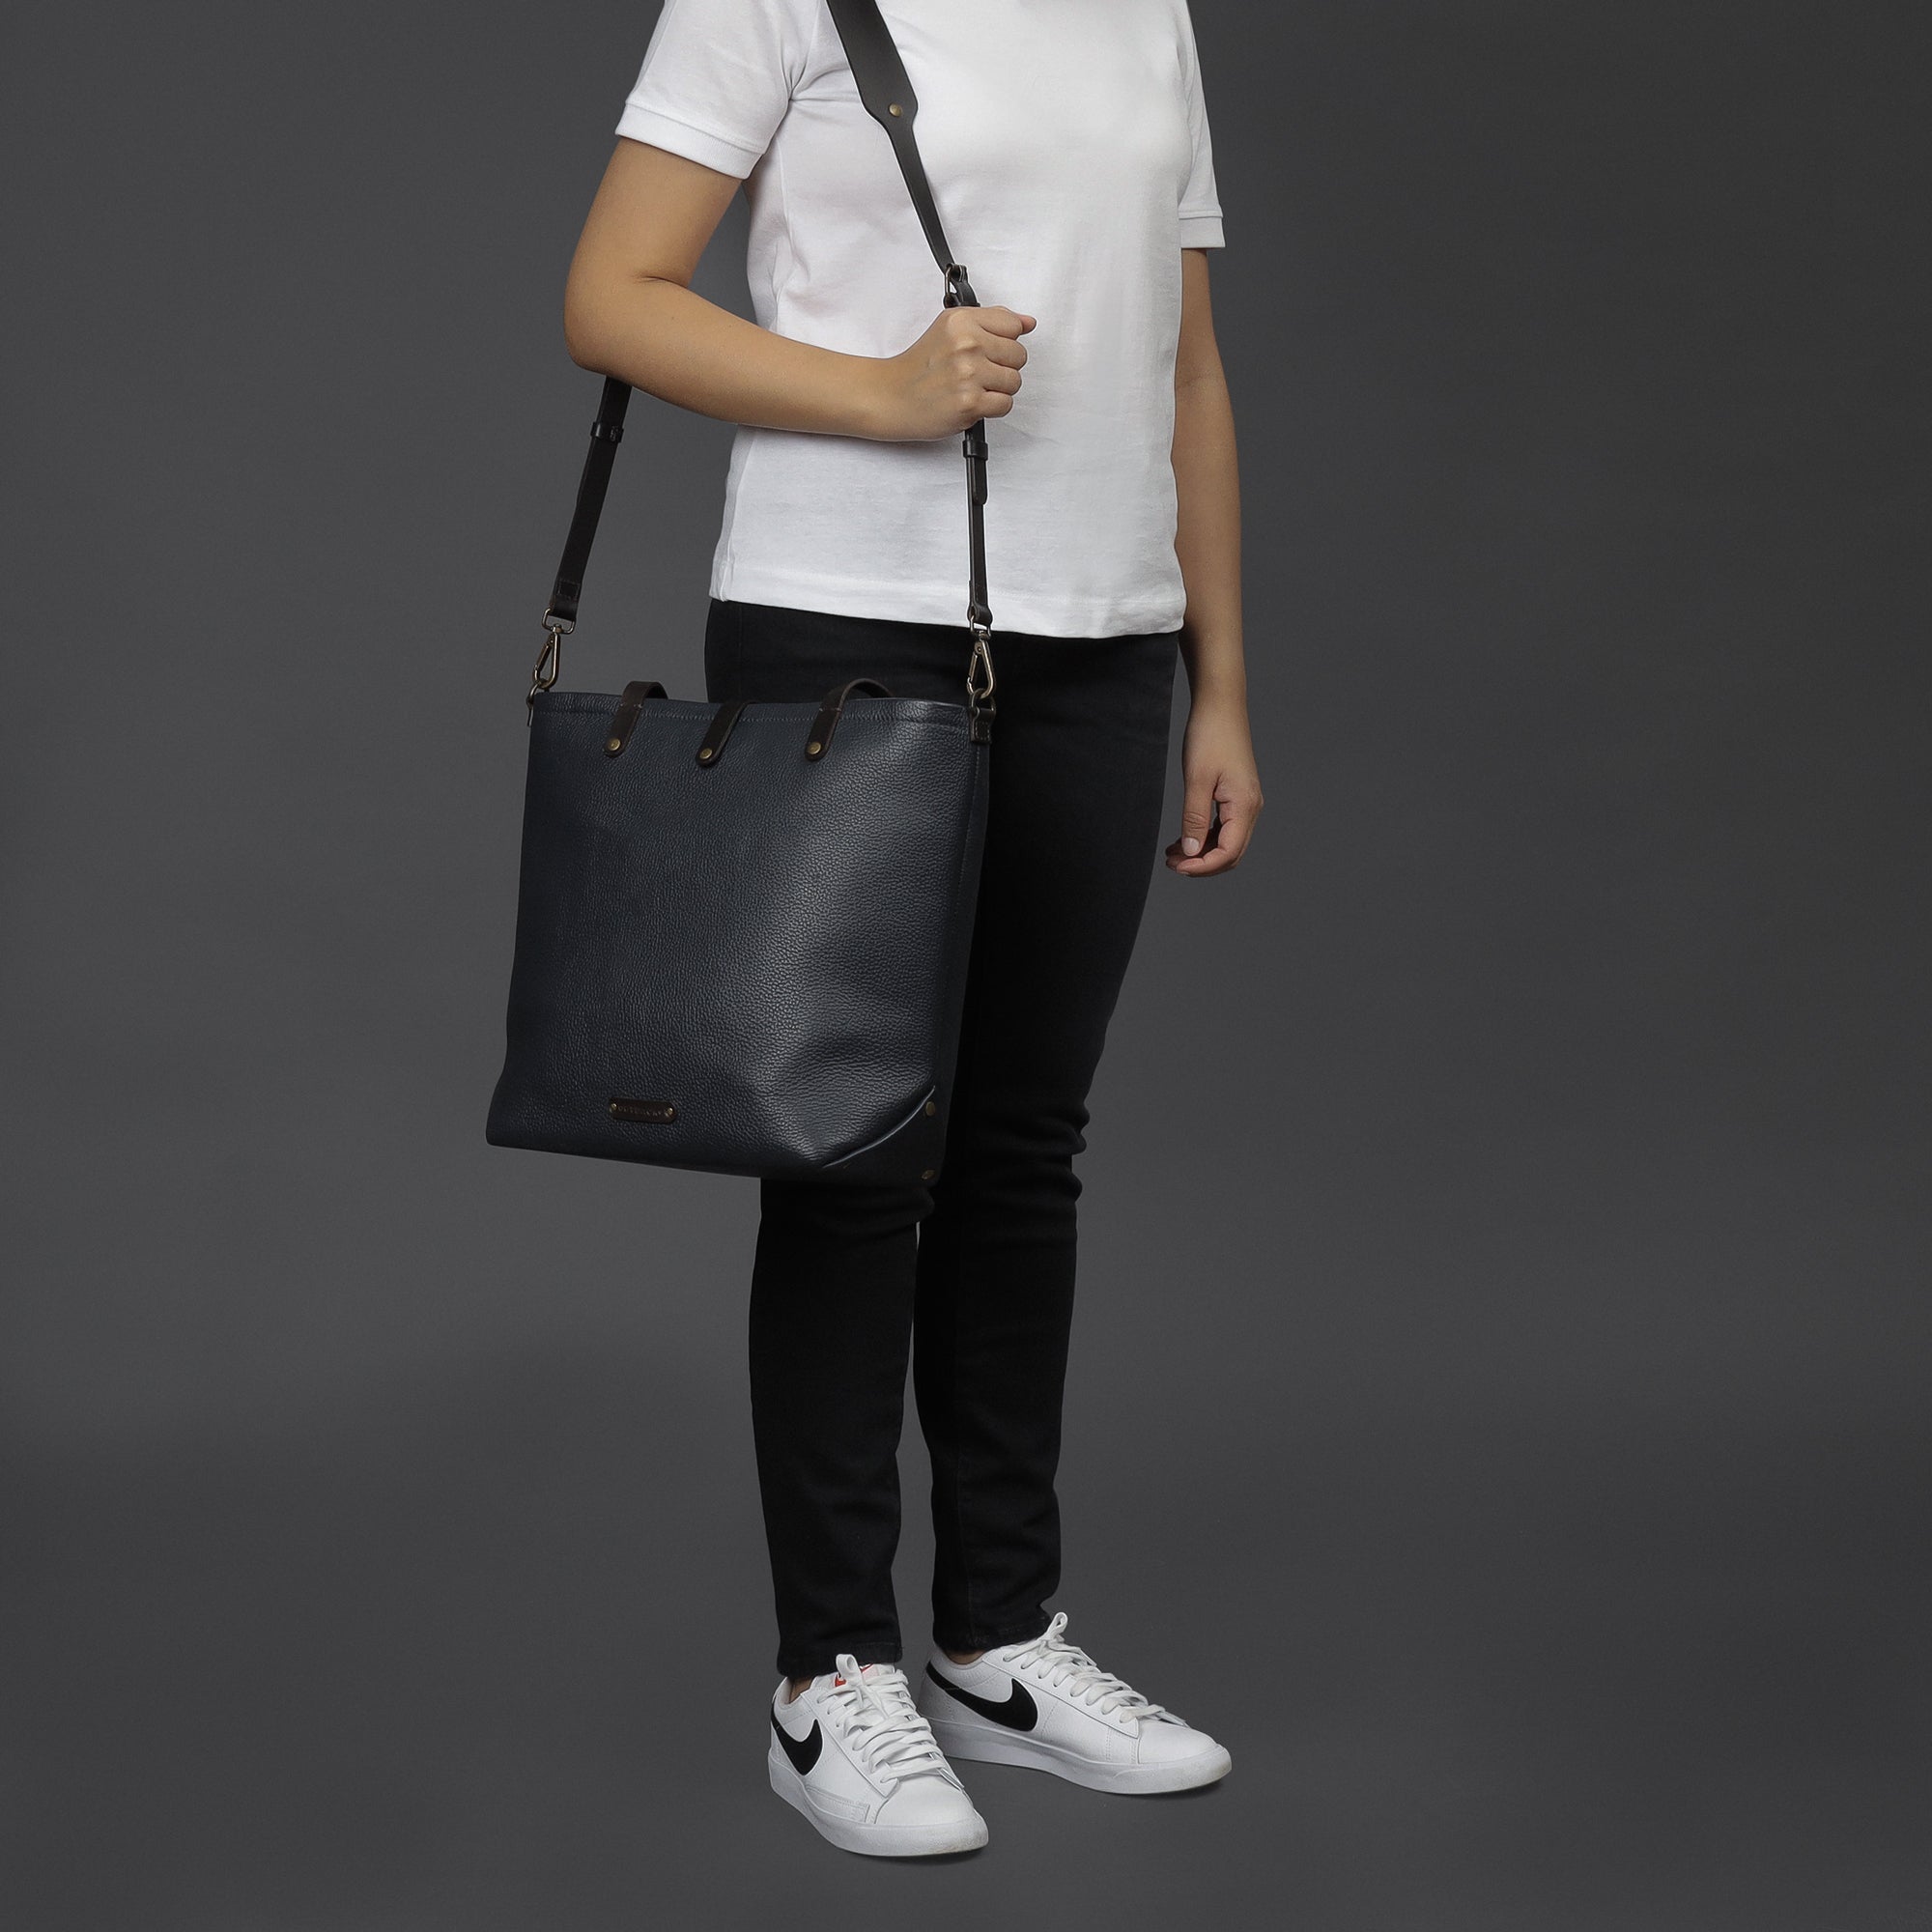 leather tote for working women